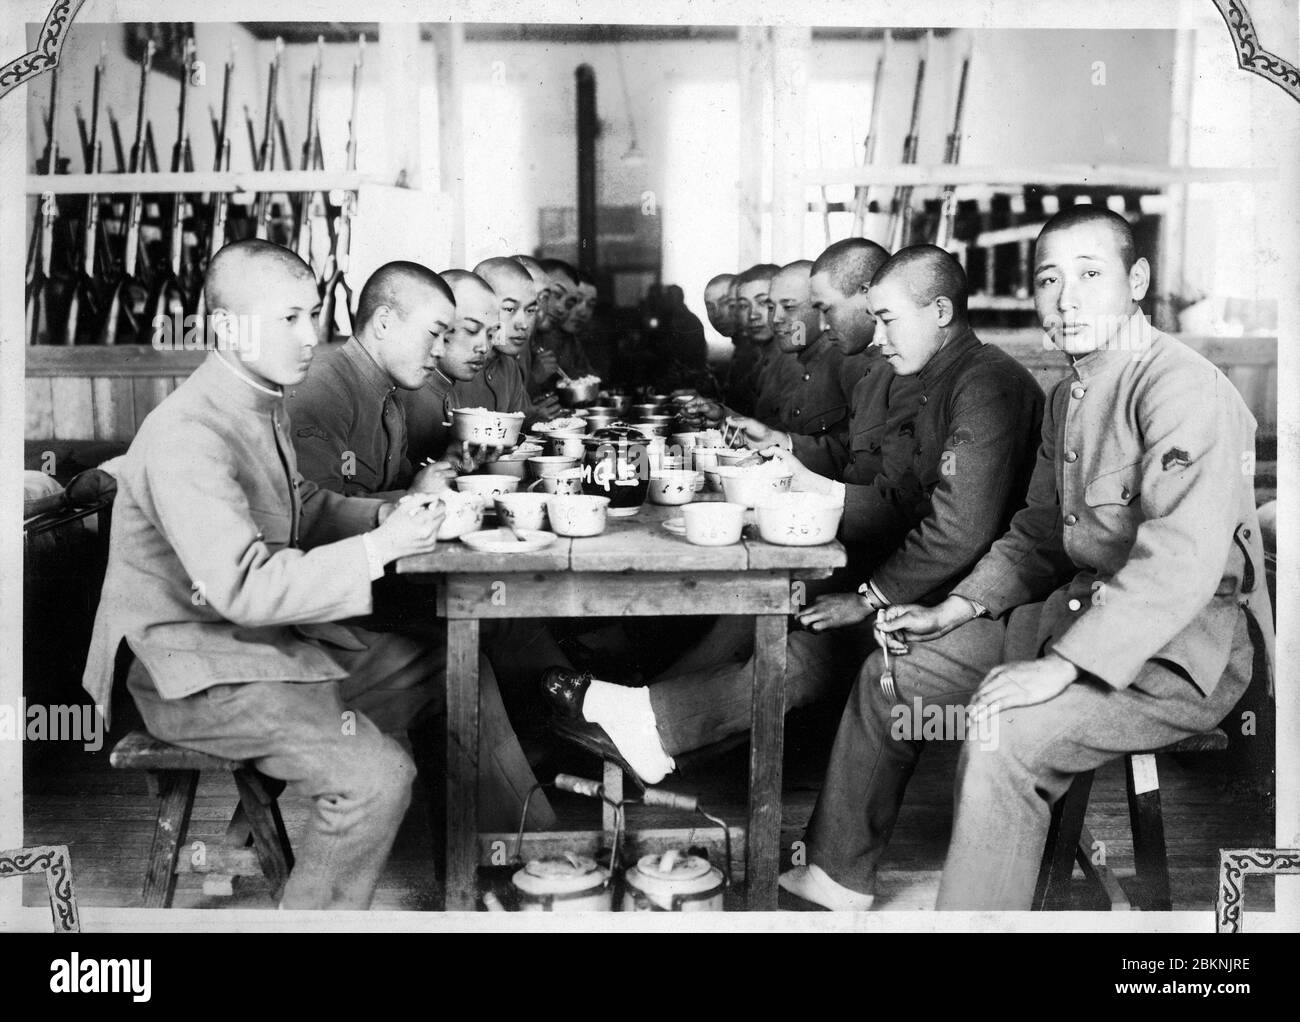 [ 1920s Japan - Japanese Imperial Guard ] —   Soldiers having their meal.  From a private photo album of a member of the Japanese Imperial Guard (近衛師団, Konoe Shidan) who served between 1928 (Showa 3) and 1930 (Showa 5).  20th century gelatin silver print. Stock Photo